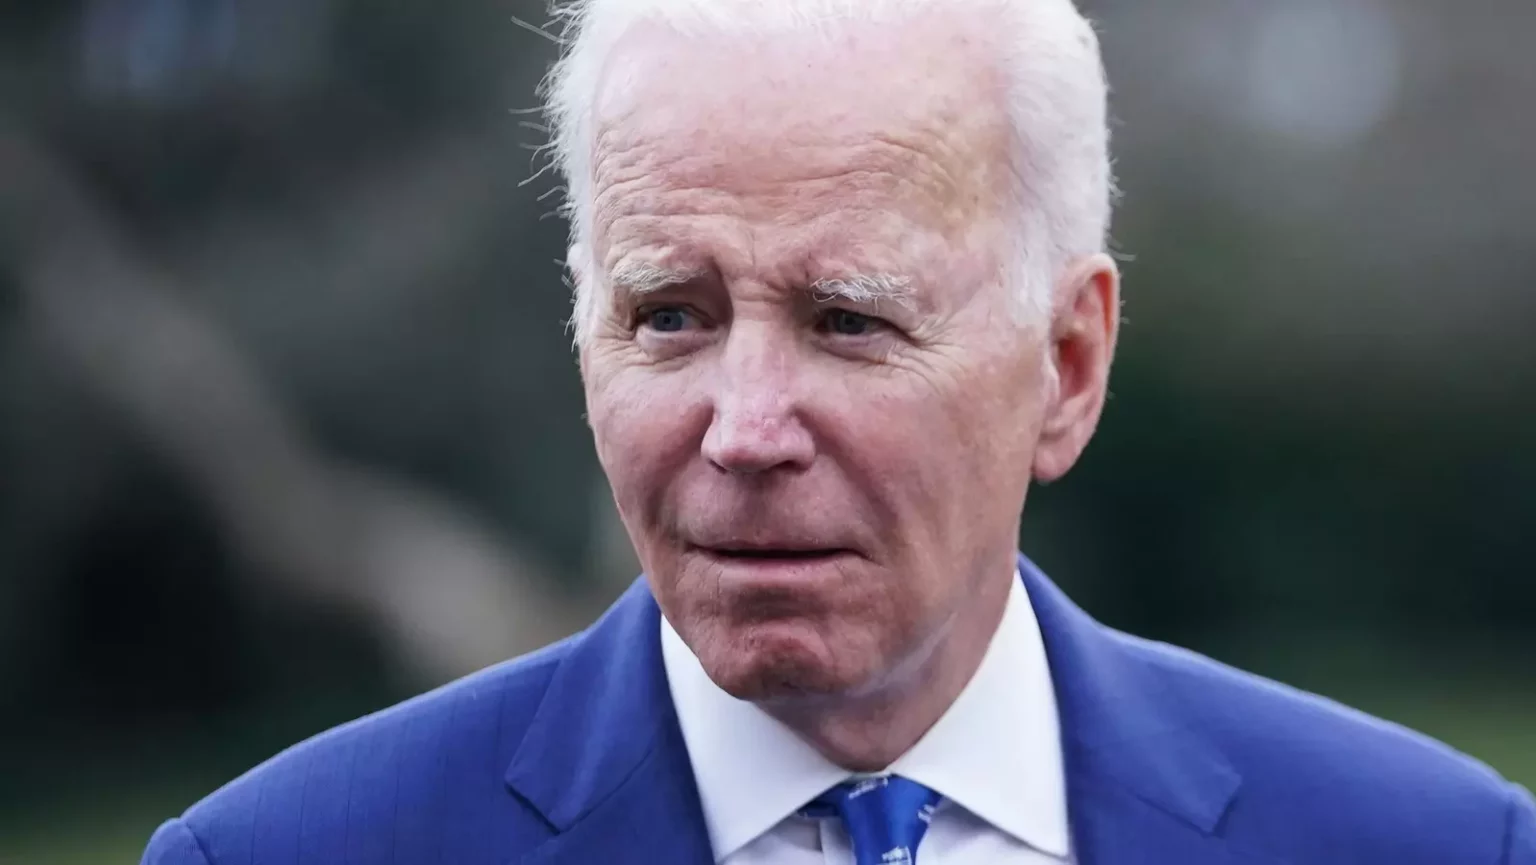 car-collides-into-parked-suv-that-was-part-of-president-joe-bidens-motorcade-in-us-delaware